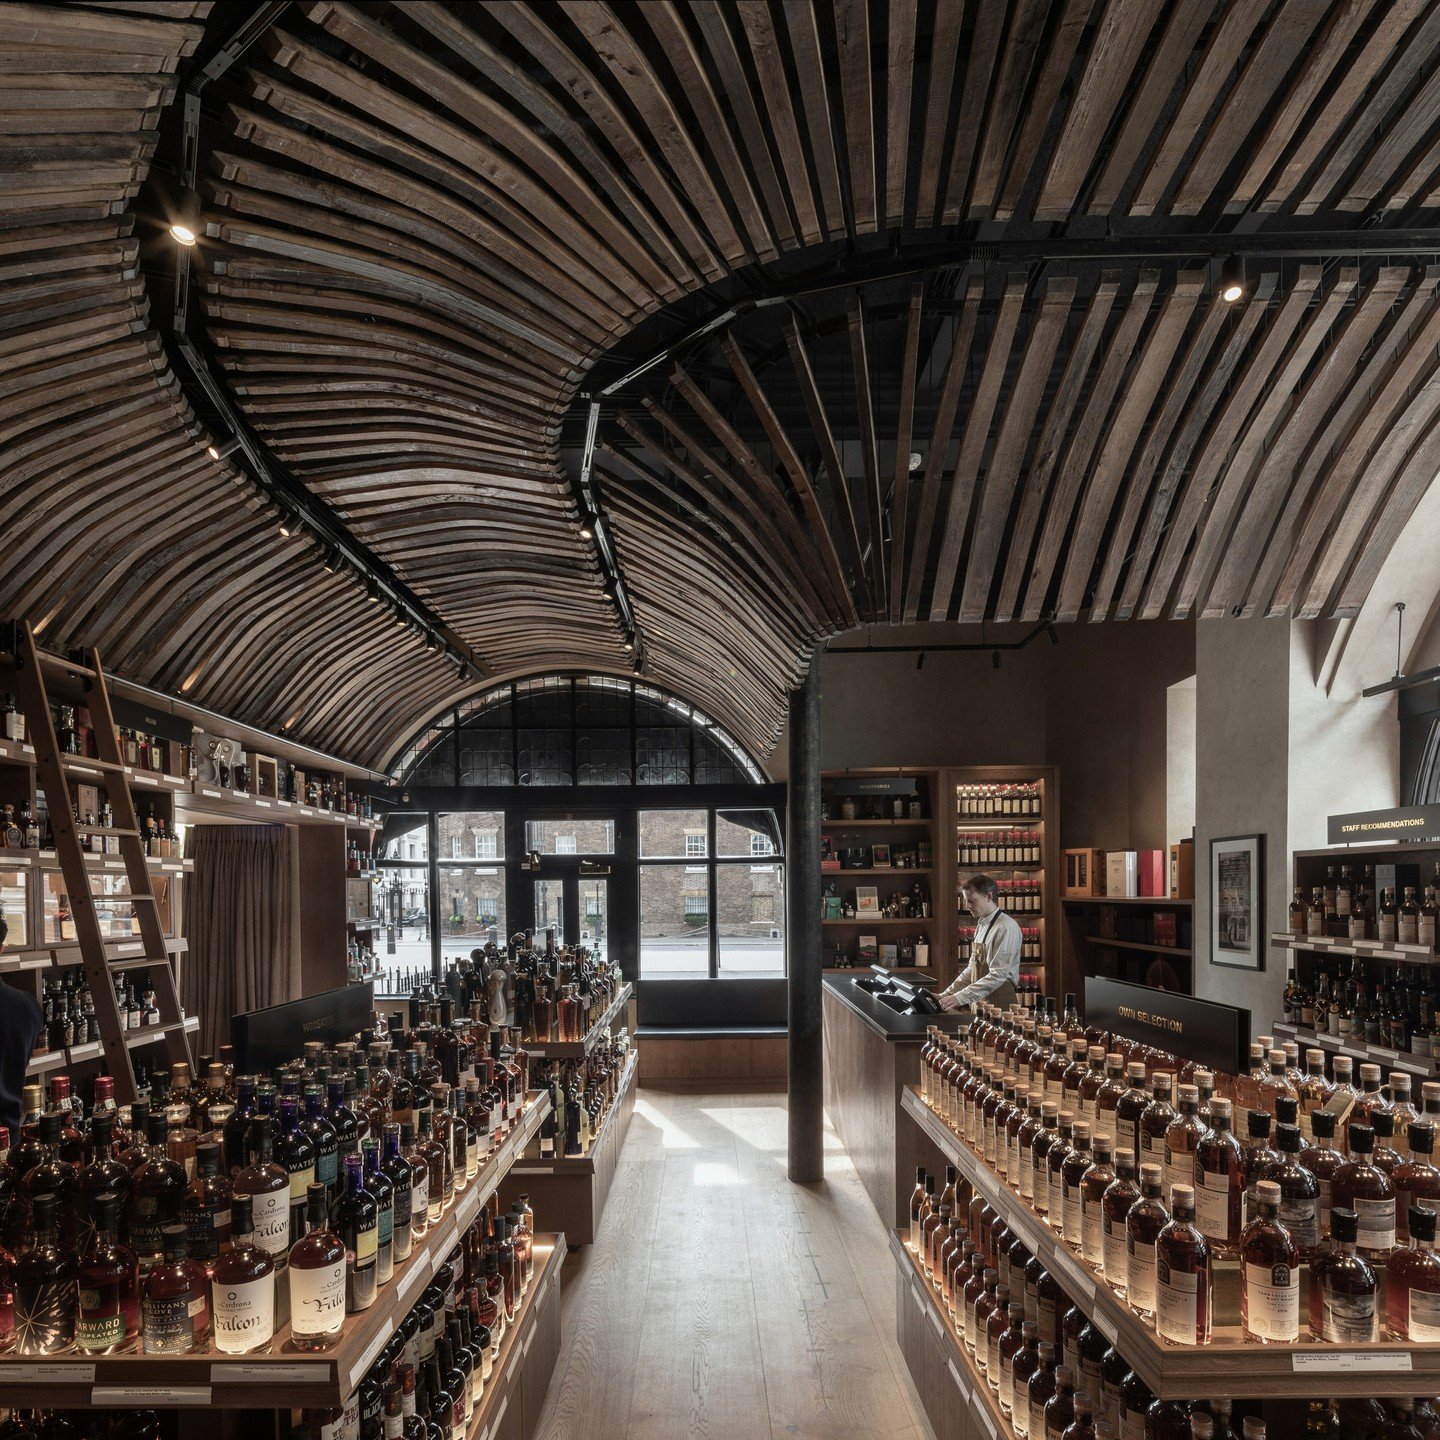 The new Spirts Shop at No.1 St James&rsquo;s Street designed for Berry Bros. &amp; Rudd, has opened its doors to customers!

We have been working with a team of collaborators to adapt Norman Shaw&rsquo;s Old Assurance Headquarters into a dedicated pr